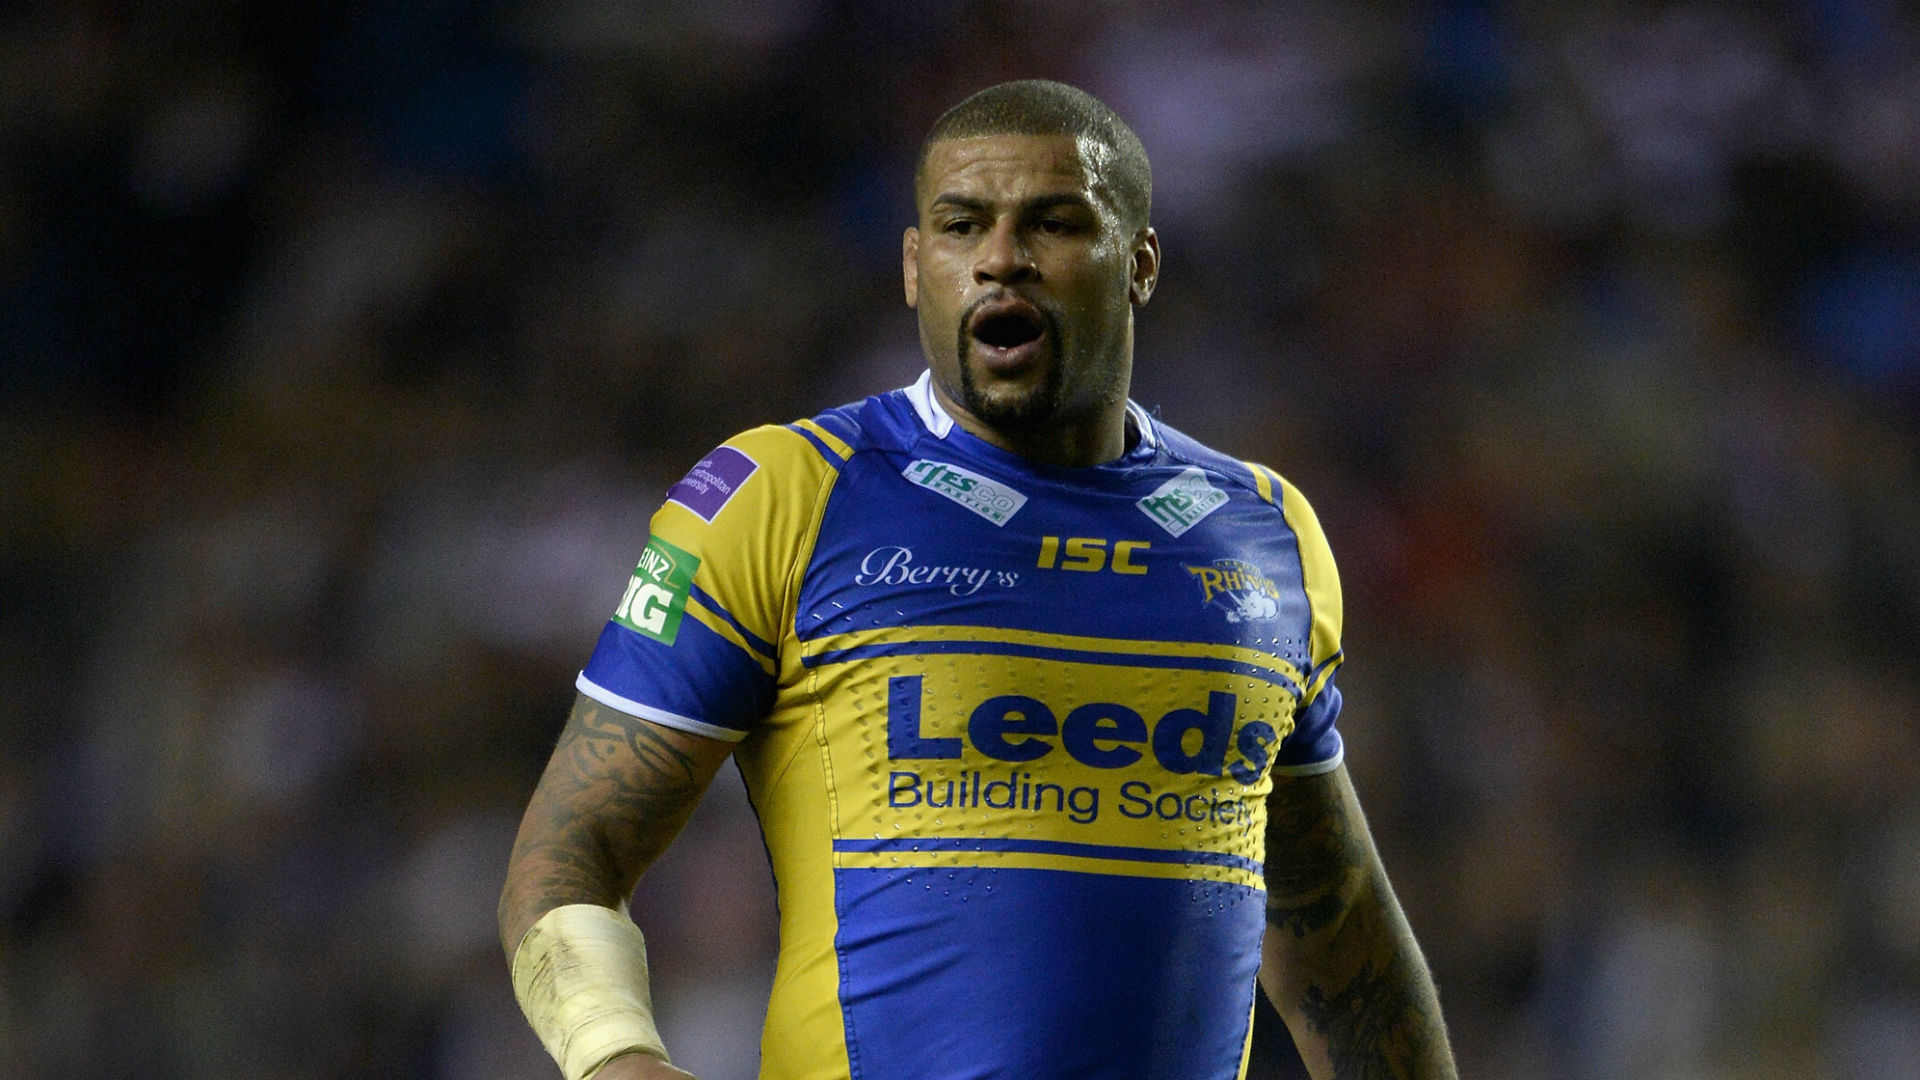 A career in the fire service beckons for former Leeds Rhinos forward Ryan Bailey after he announced his retirement from rugby league.